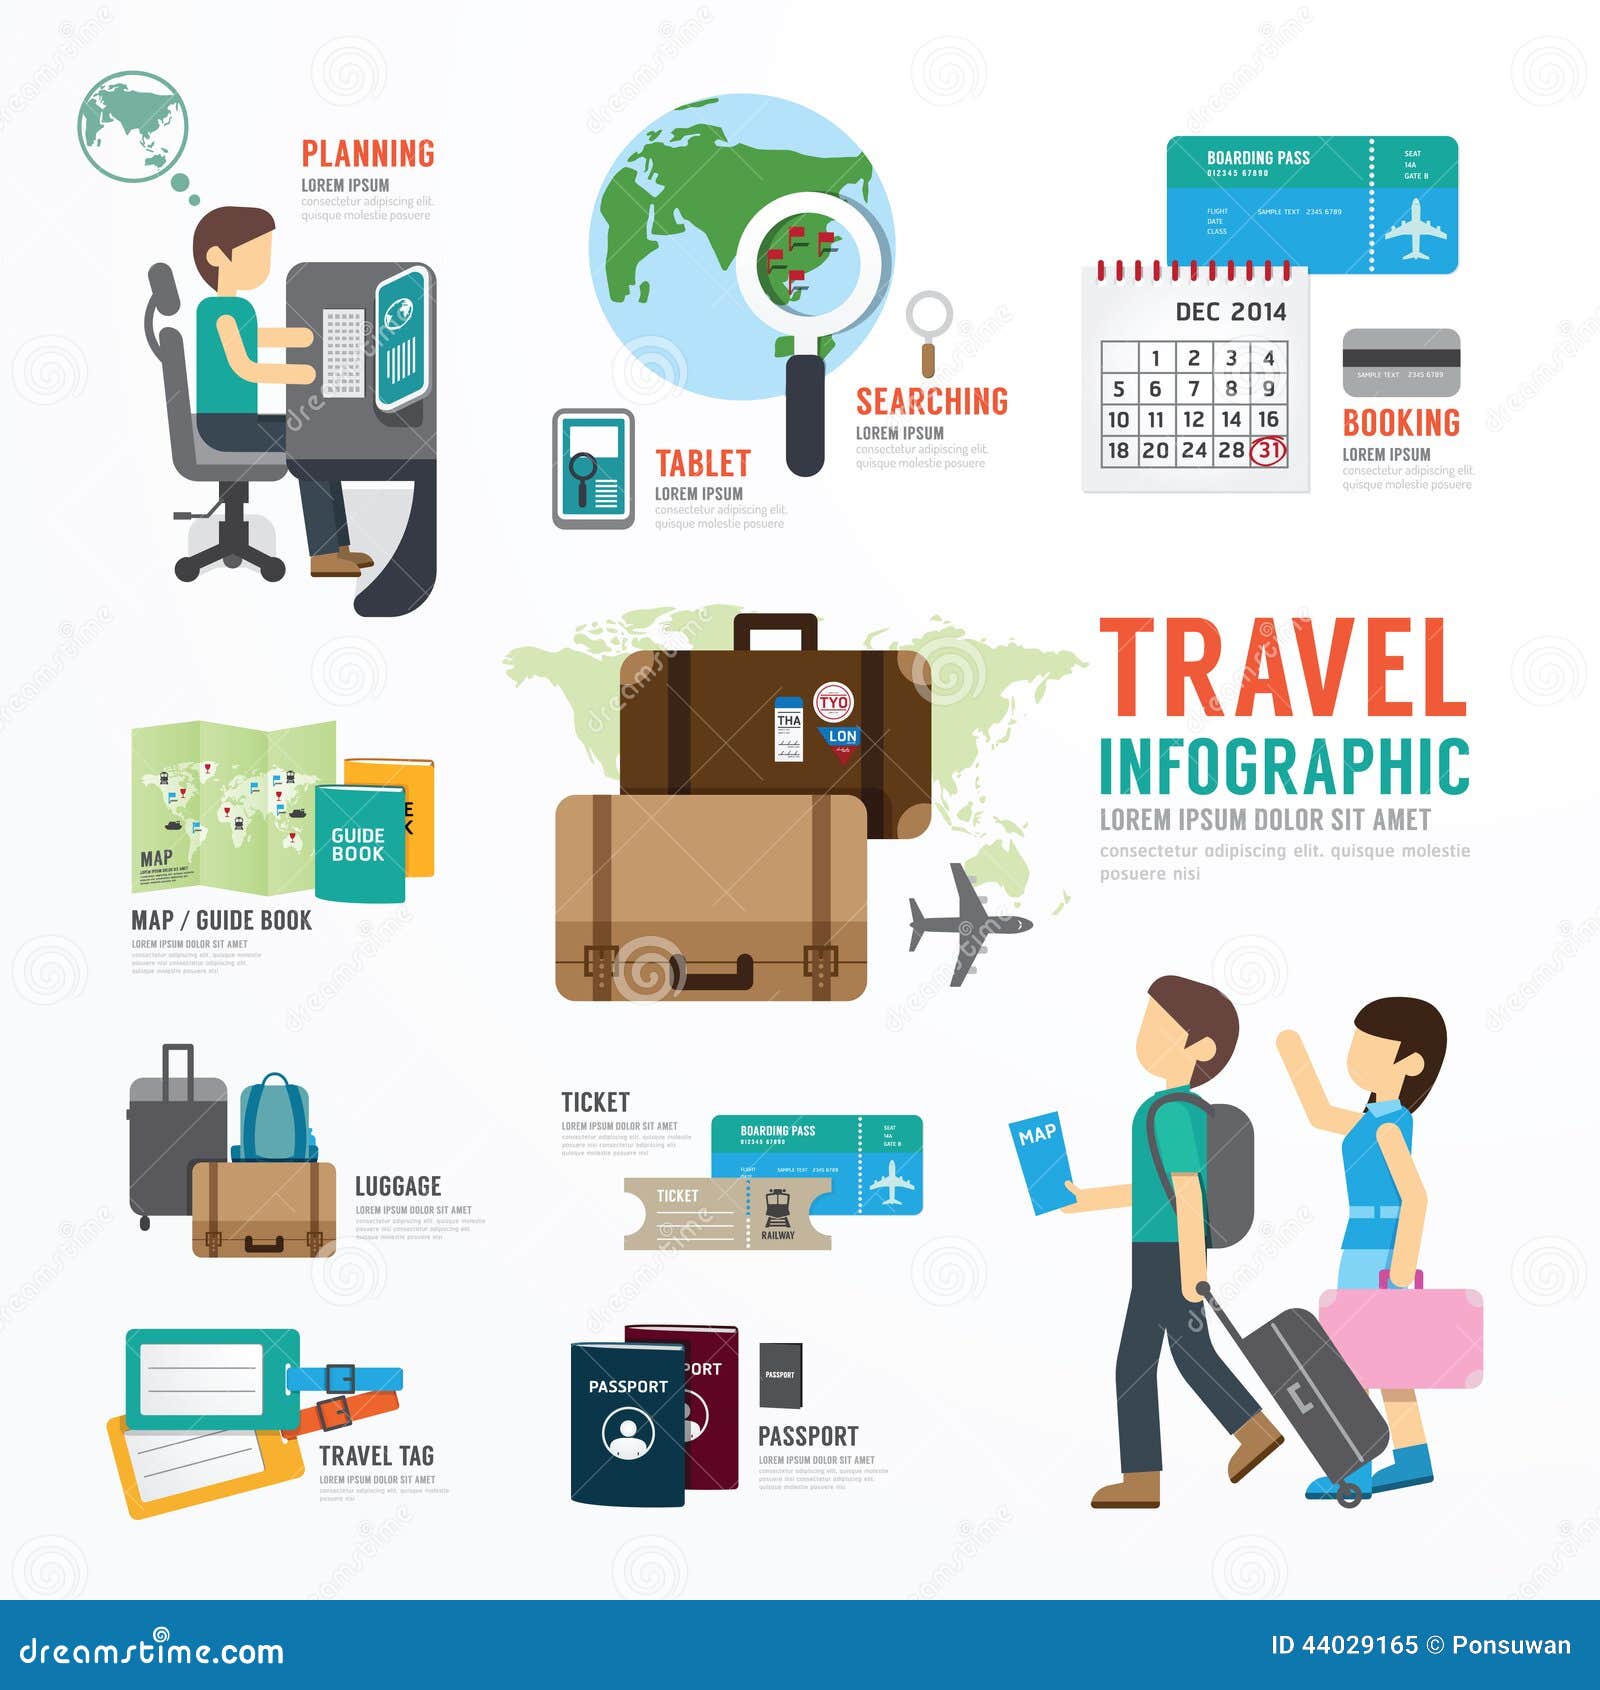 travel guide clipart - photo #37